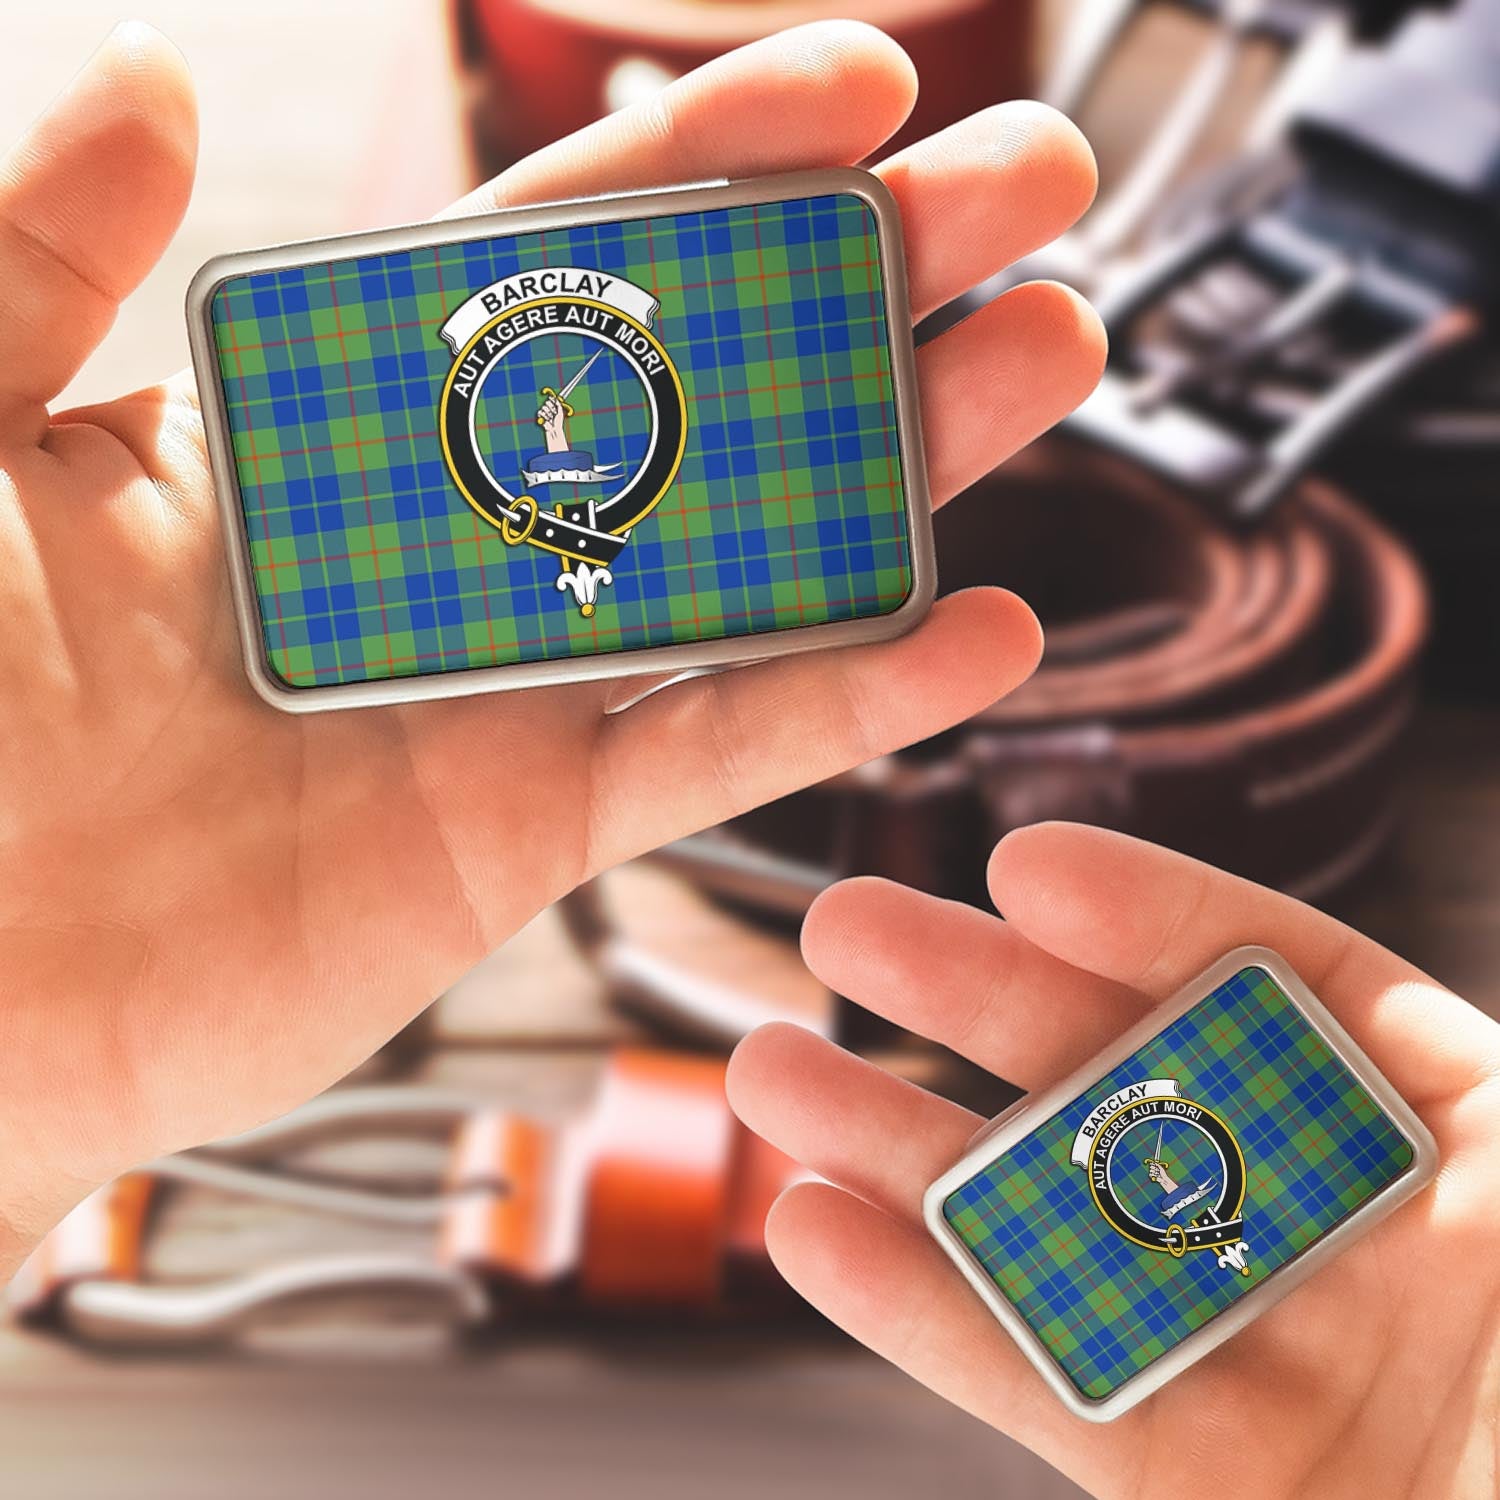 Barclay Hunting Ancient Tartan Belt Buckles with Family Crest - Tartanvibesclothing